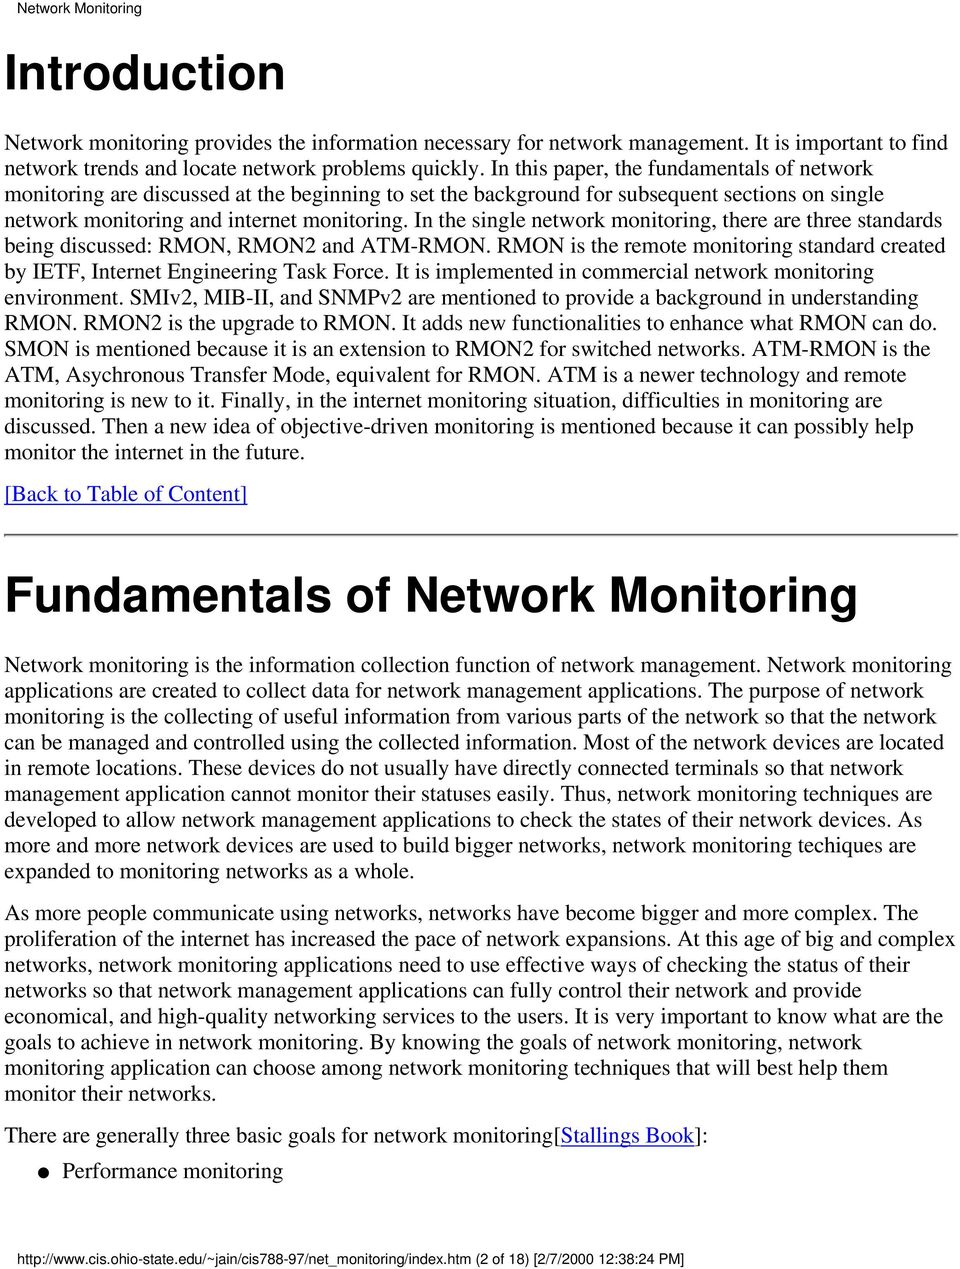 In the single network monitoring, there are three standards being discussed: RMON, RMON2 and ATM-RMON. RMON is the remote monitoring standard created by IETF, Internet Engineering Task Force.